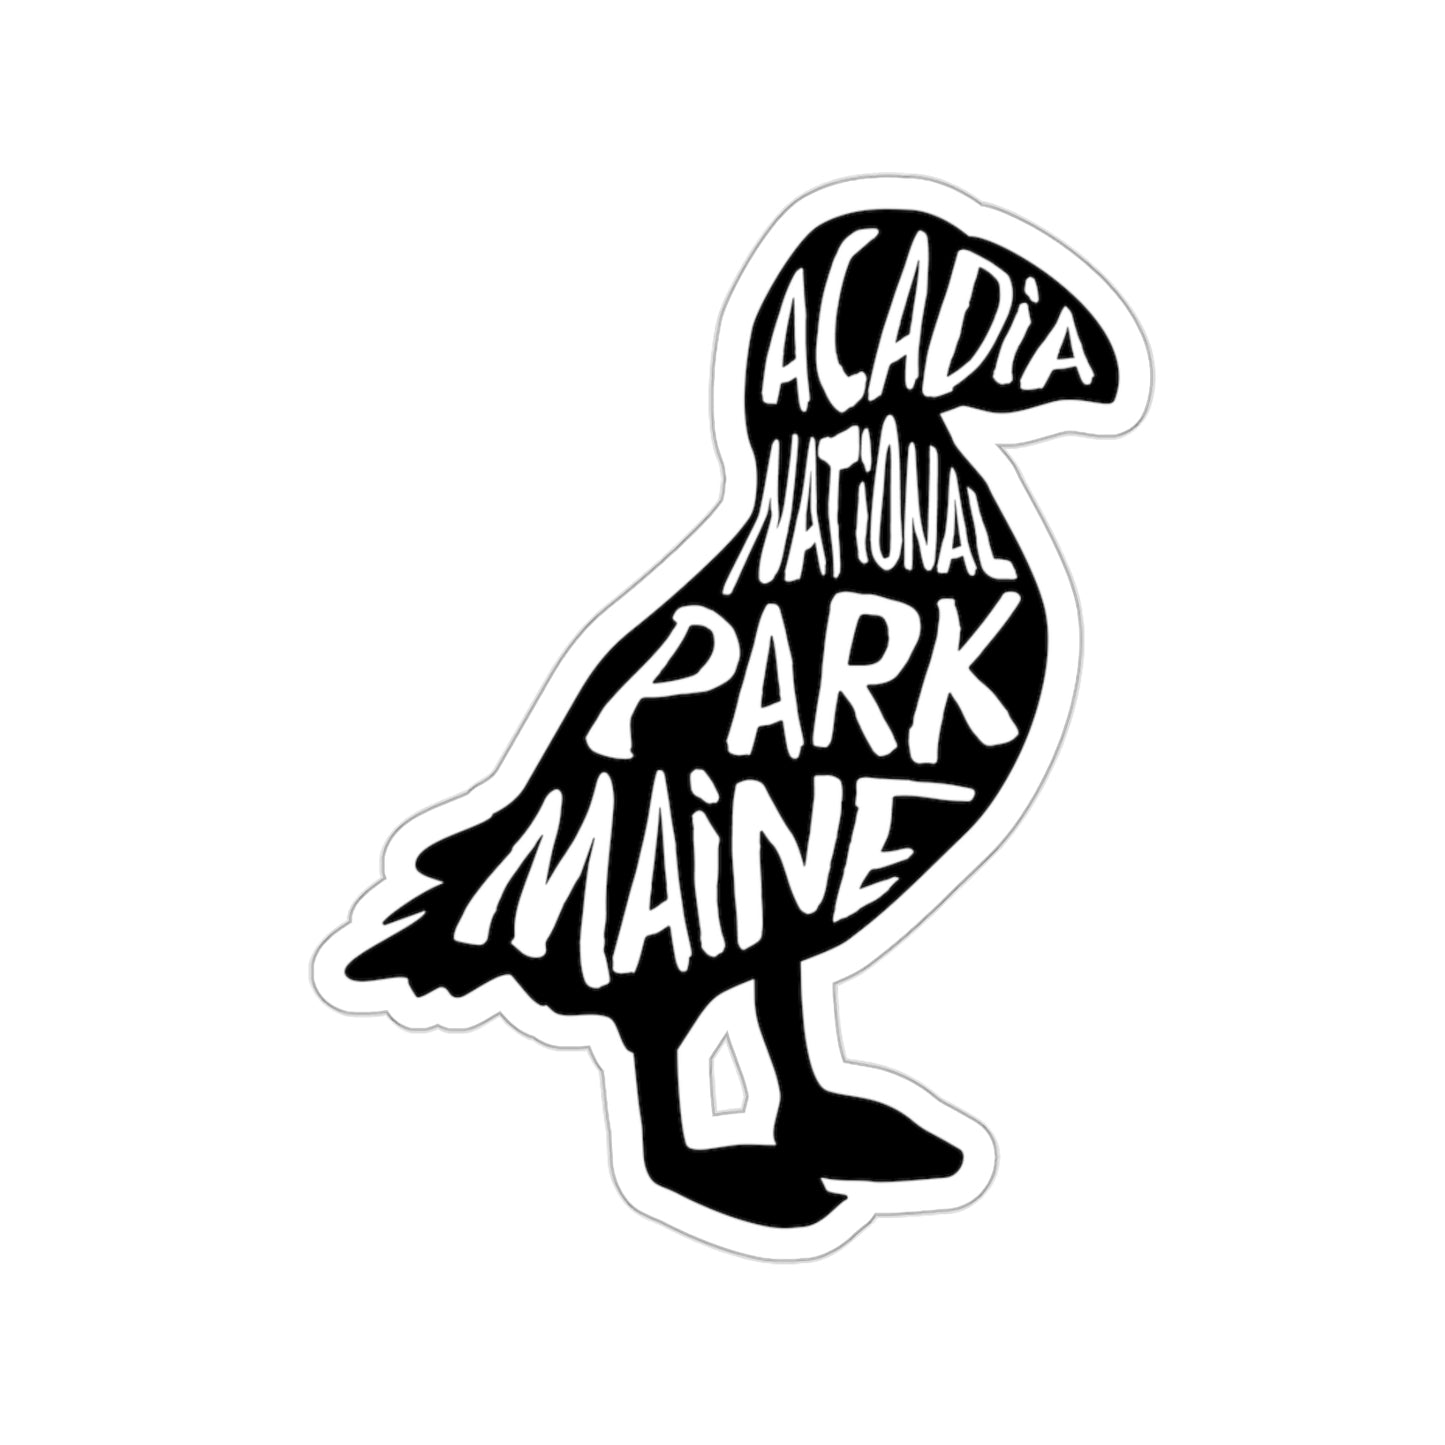 Acadia National Park Sticker - Puffin